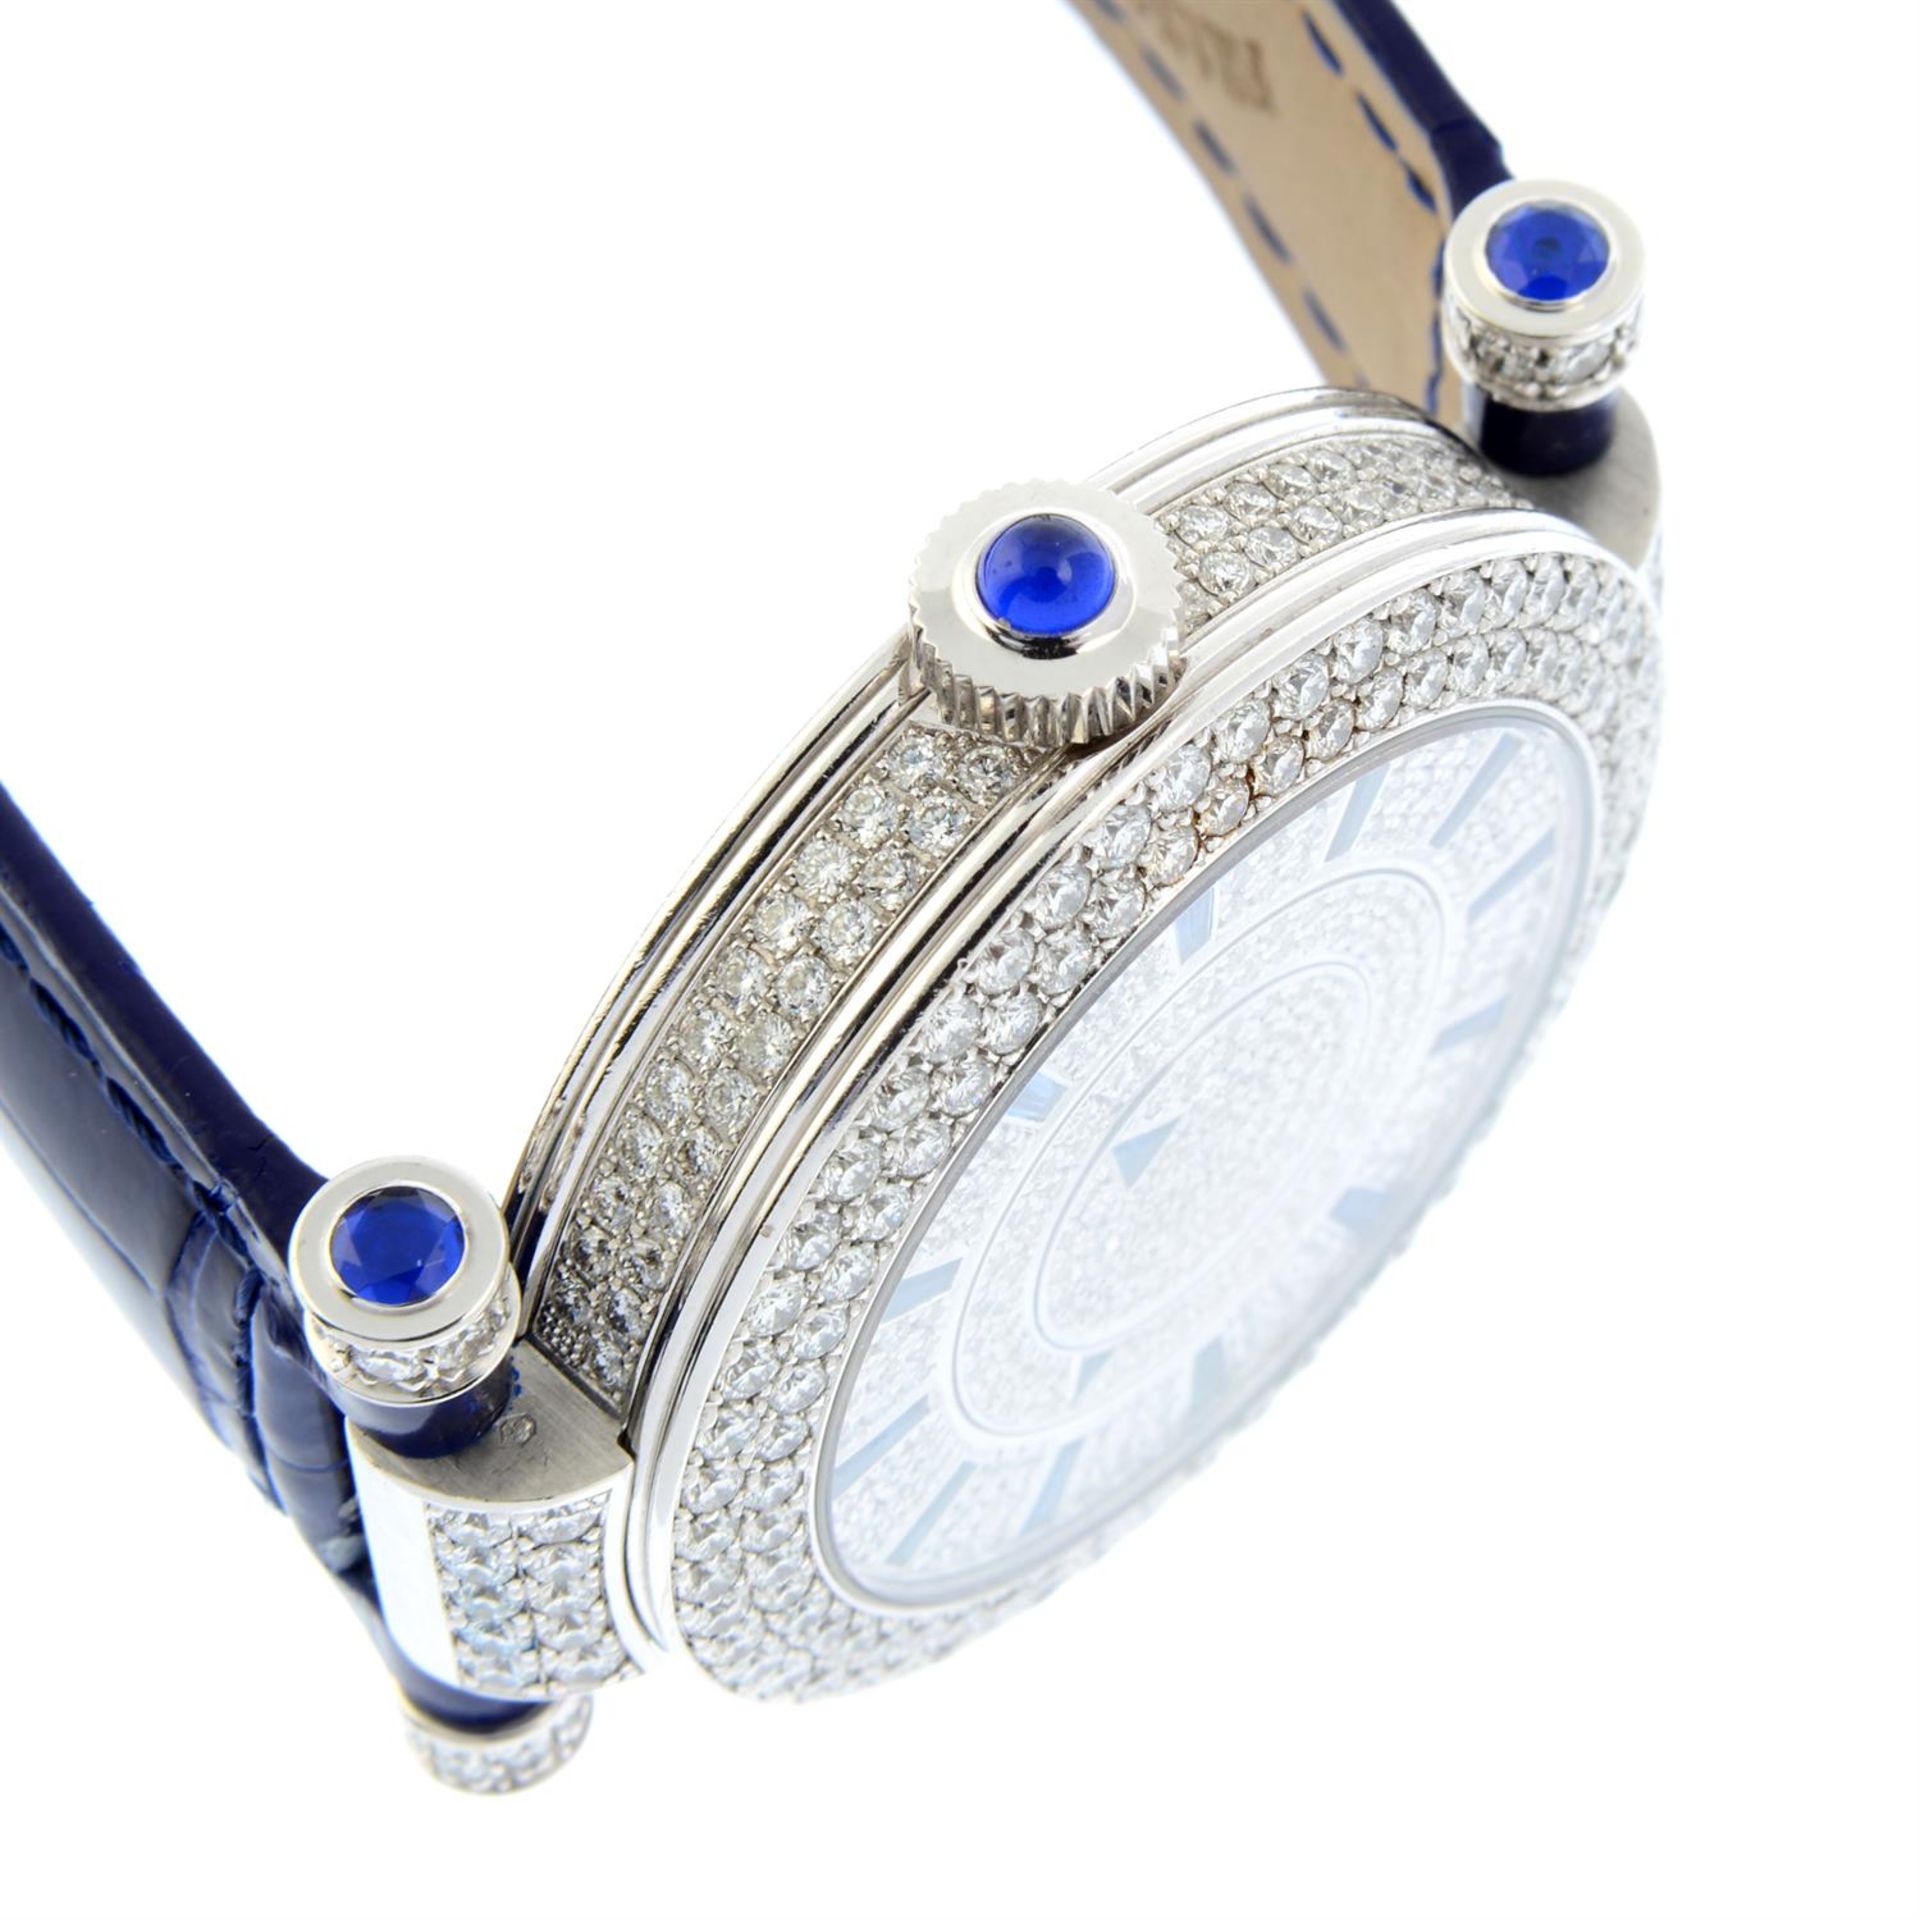 FRANCK MULLER - a factory diamond set 18ct white gold Double Mystery wrist watch, 39mm. - Image 3 of 6